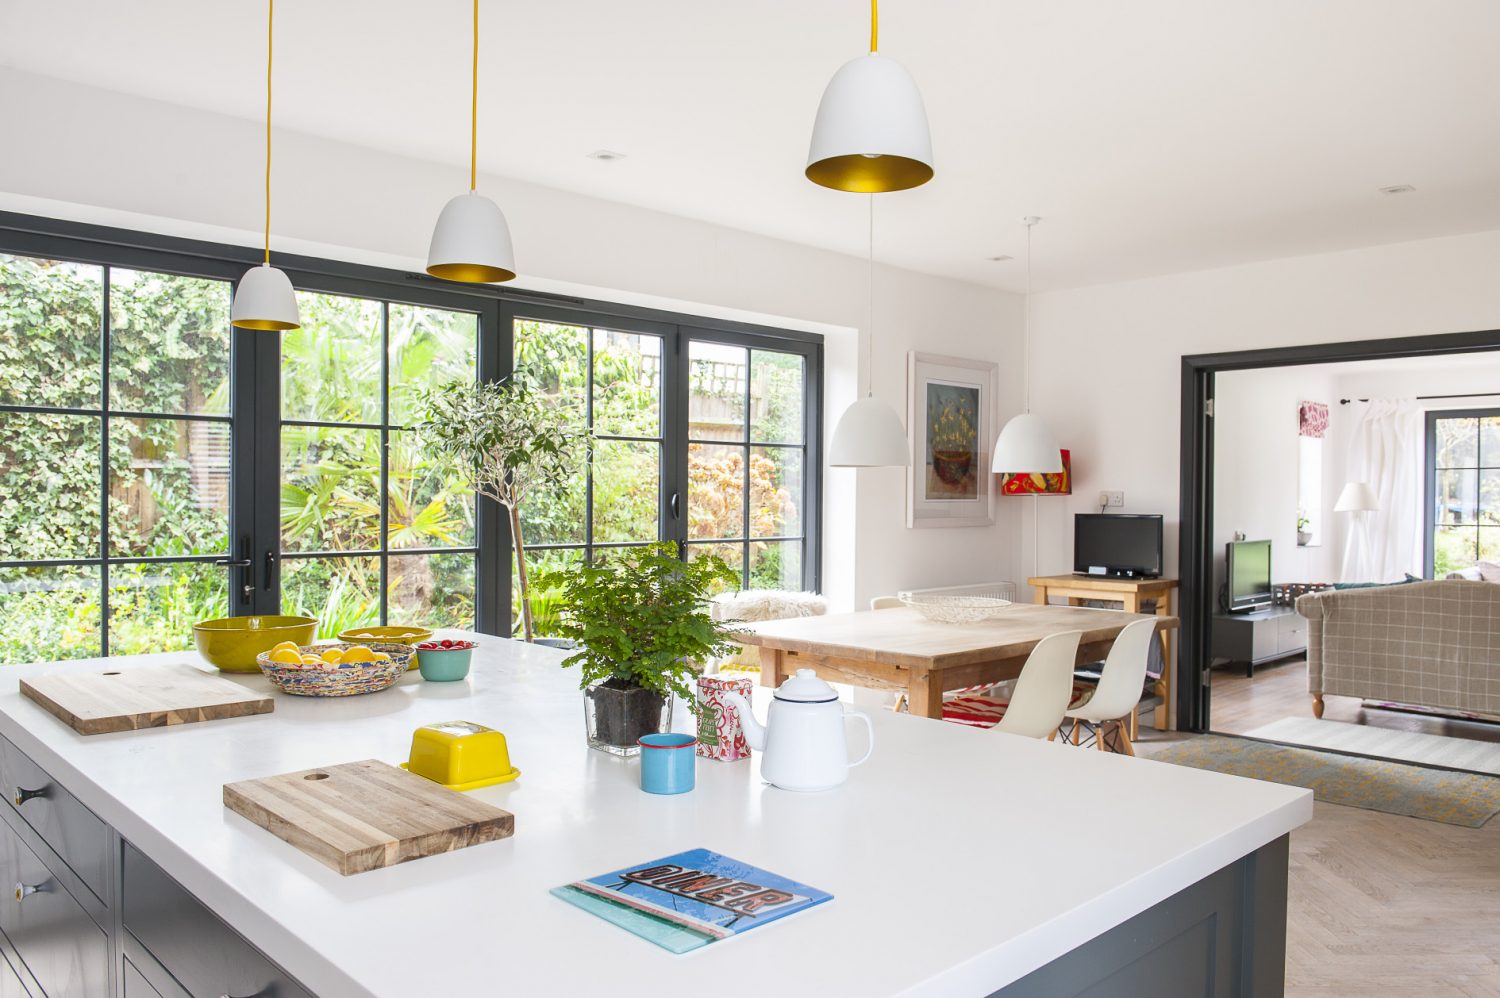 The kitchen space was once three rooms and a corridor, but is now open-plan light and airy